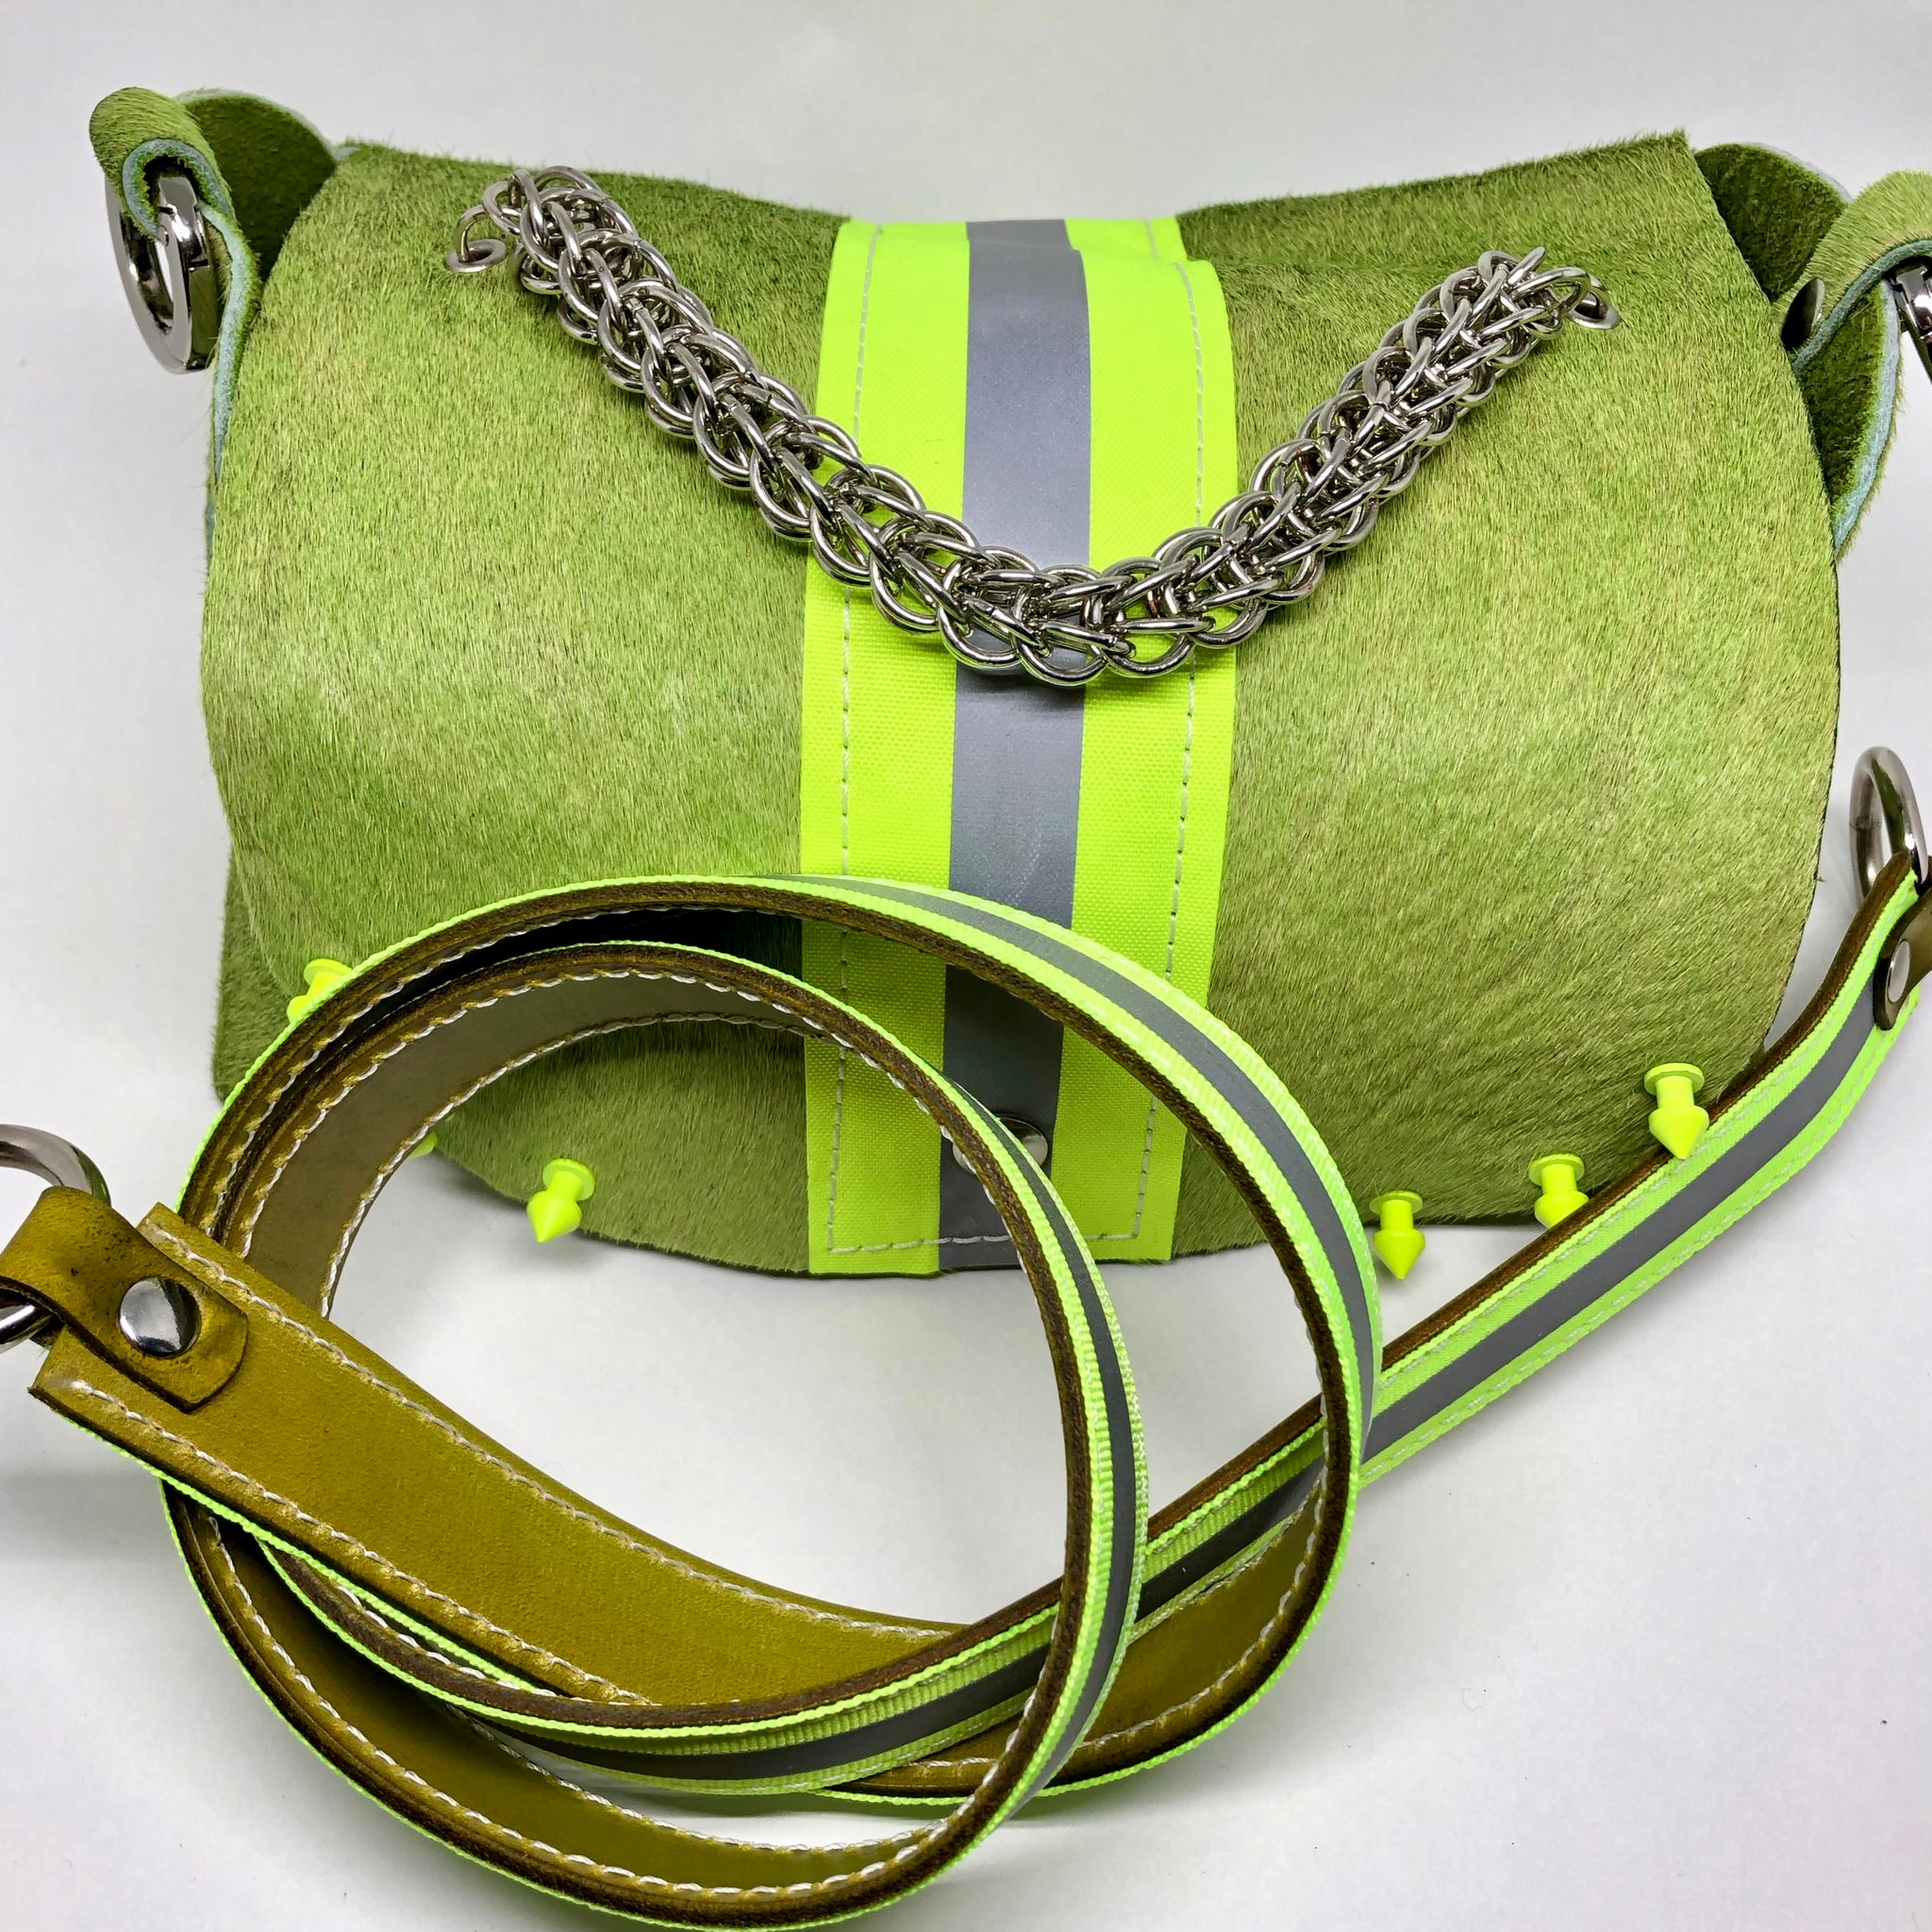 HAIR-ON COWHIDE LEATHER WITH WIDE NEON YELLOW REFLECTIVE TRIM RIVETED DAY-TO-EVENING BAG WITH STAINLESS STEEL METAL HARDWARE, CHAIN MAILLE HANDLE AND REMOVABLE SHOULDER STRAP.